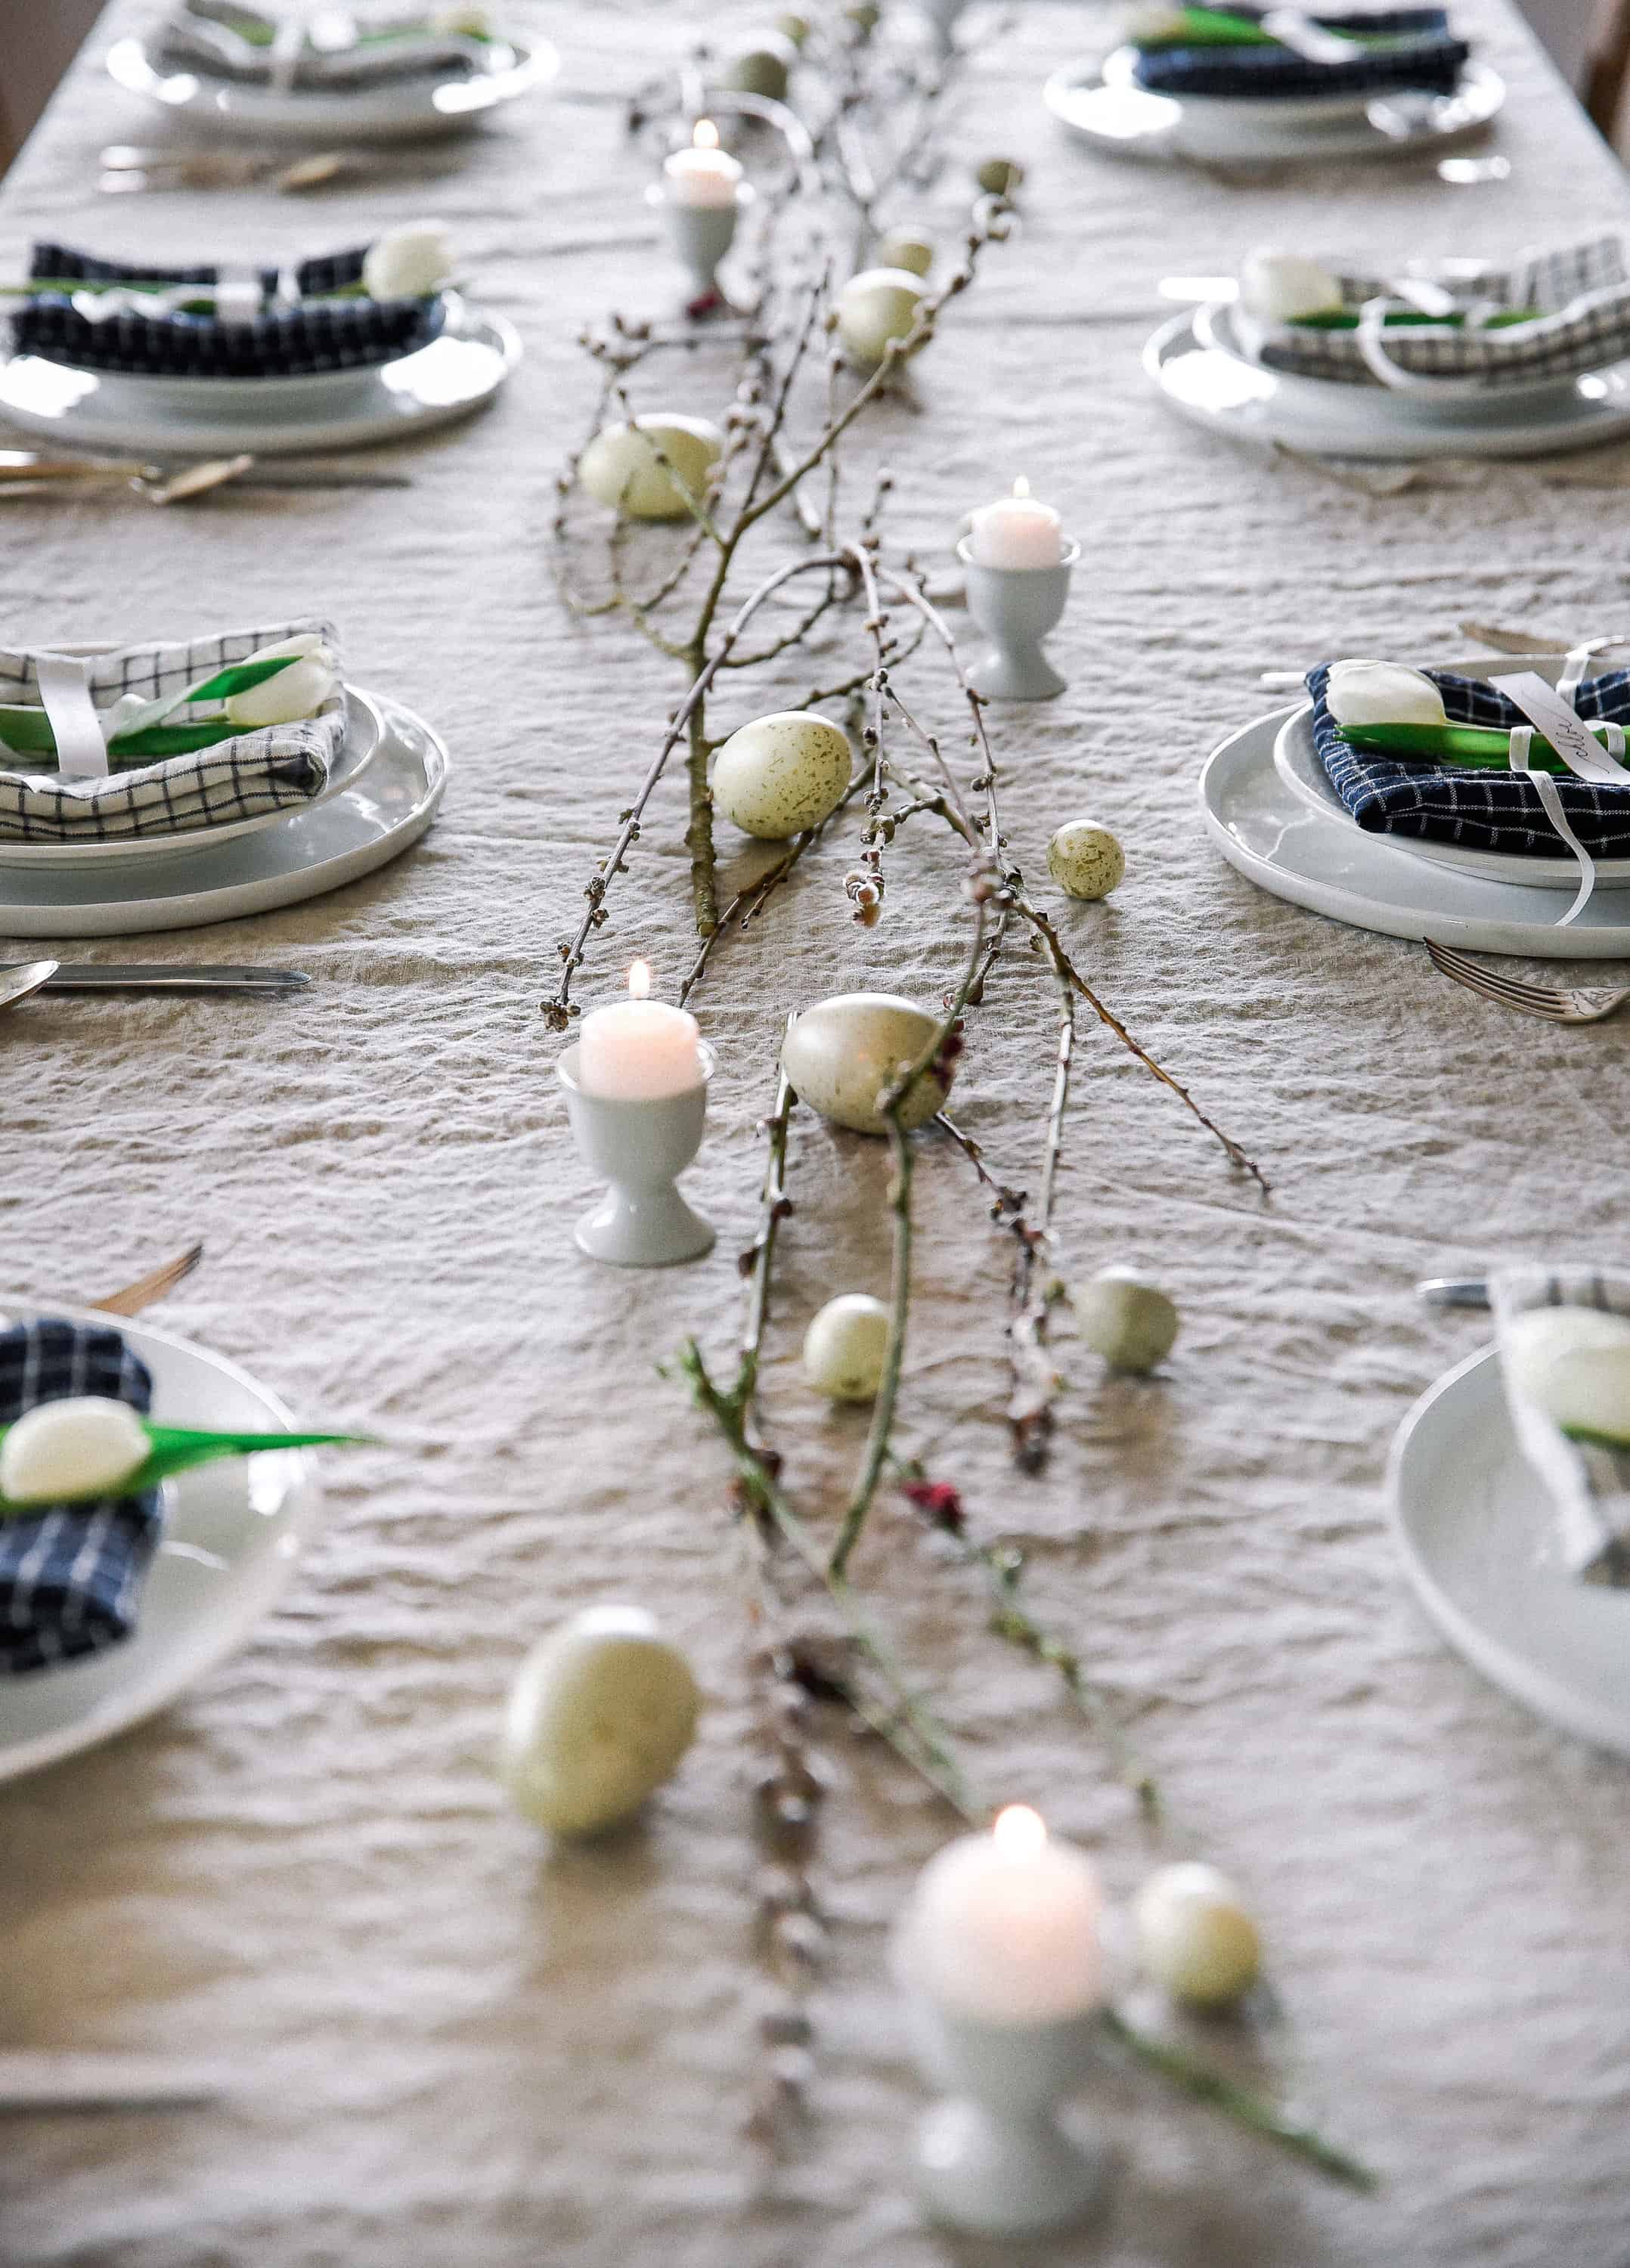 Get inspired to decorate for Easter this year with these easy Easter decorating ideas! This Easter table is beautiful and perfect for an Easter lunch with family or friends.